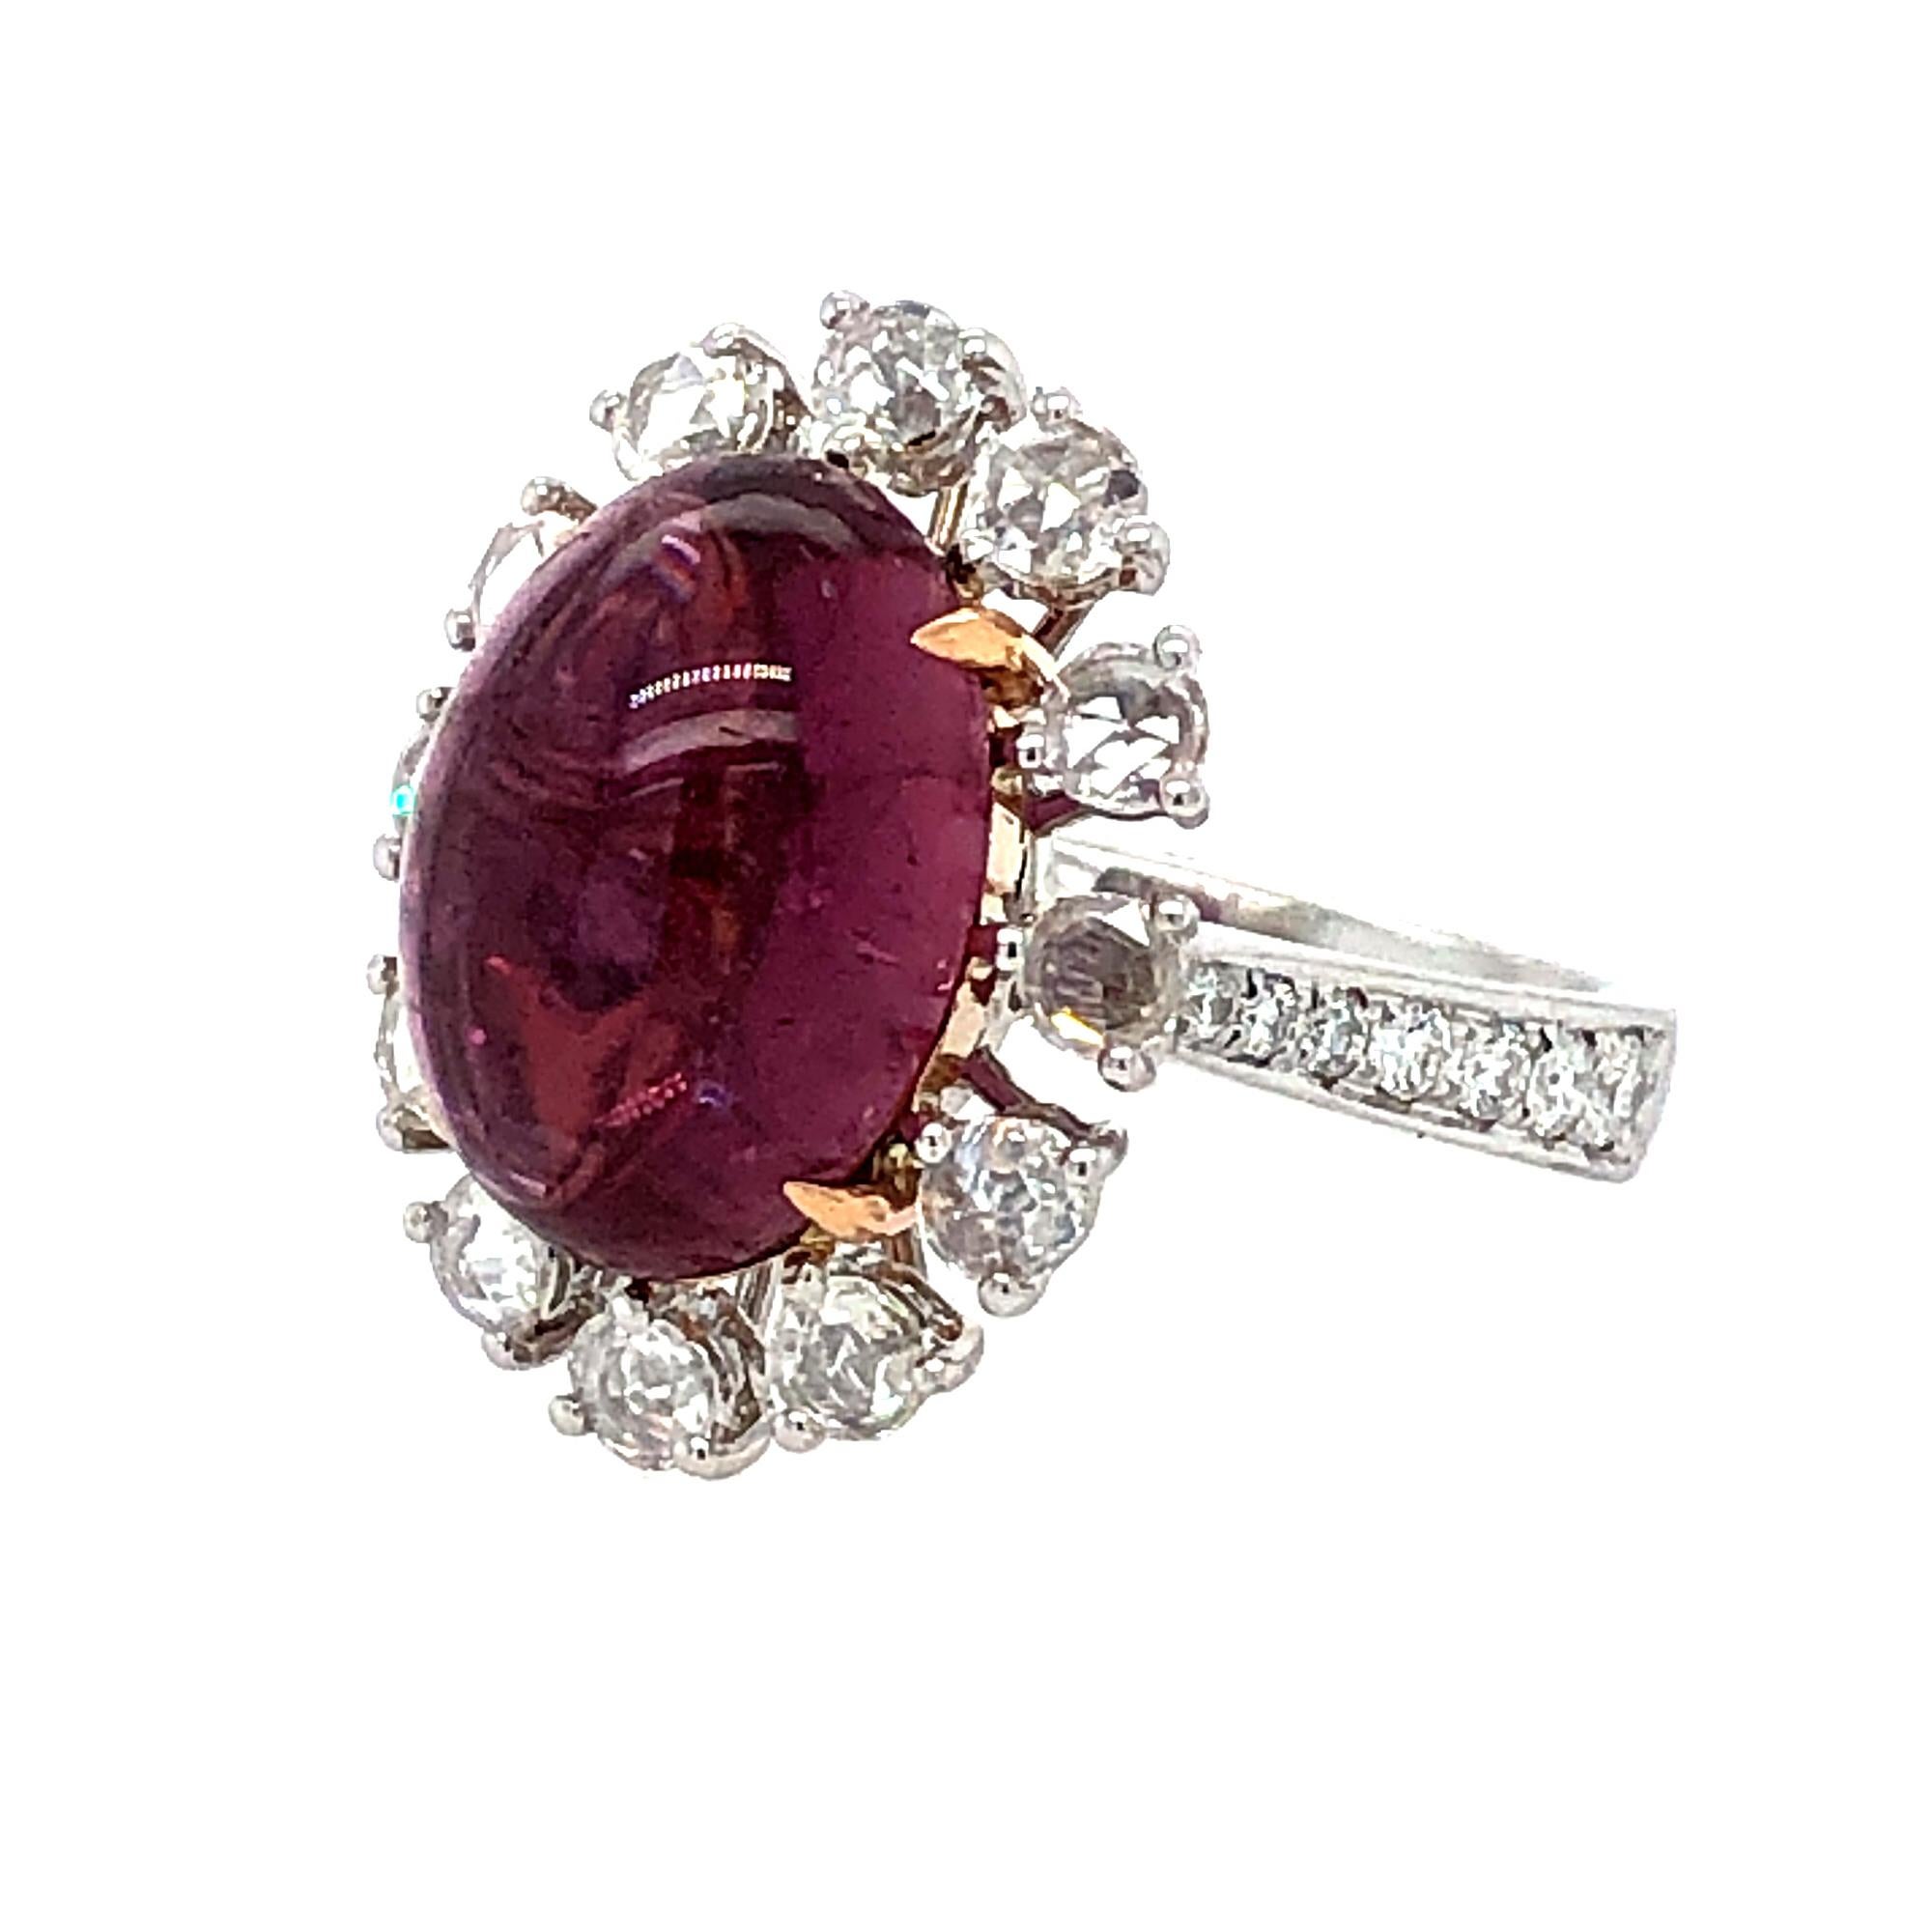 Offered here is a natural earth mined Berry color Tourmaline, cabochon cut approx. 8.00 carats. 
This pinkish red gemstone is framed with 12 large rose cut diamonds, shank is further adorned with 7 graduating modern cut diamonds on each side. 
This